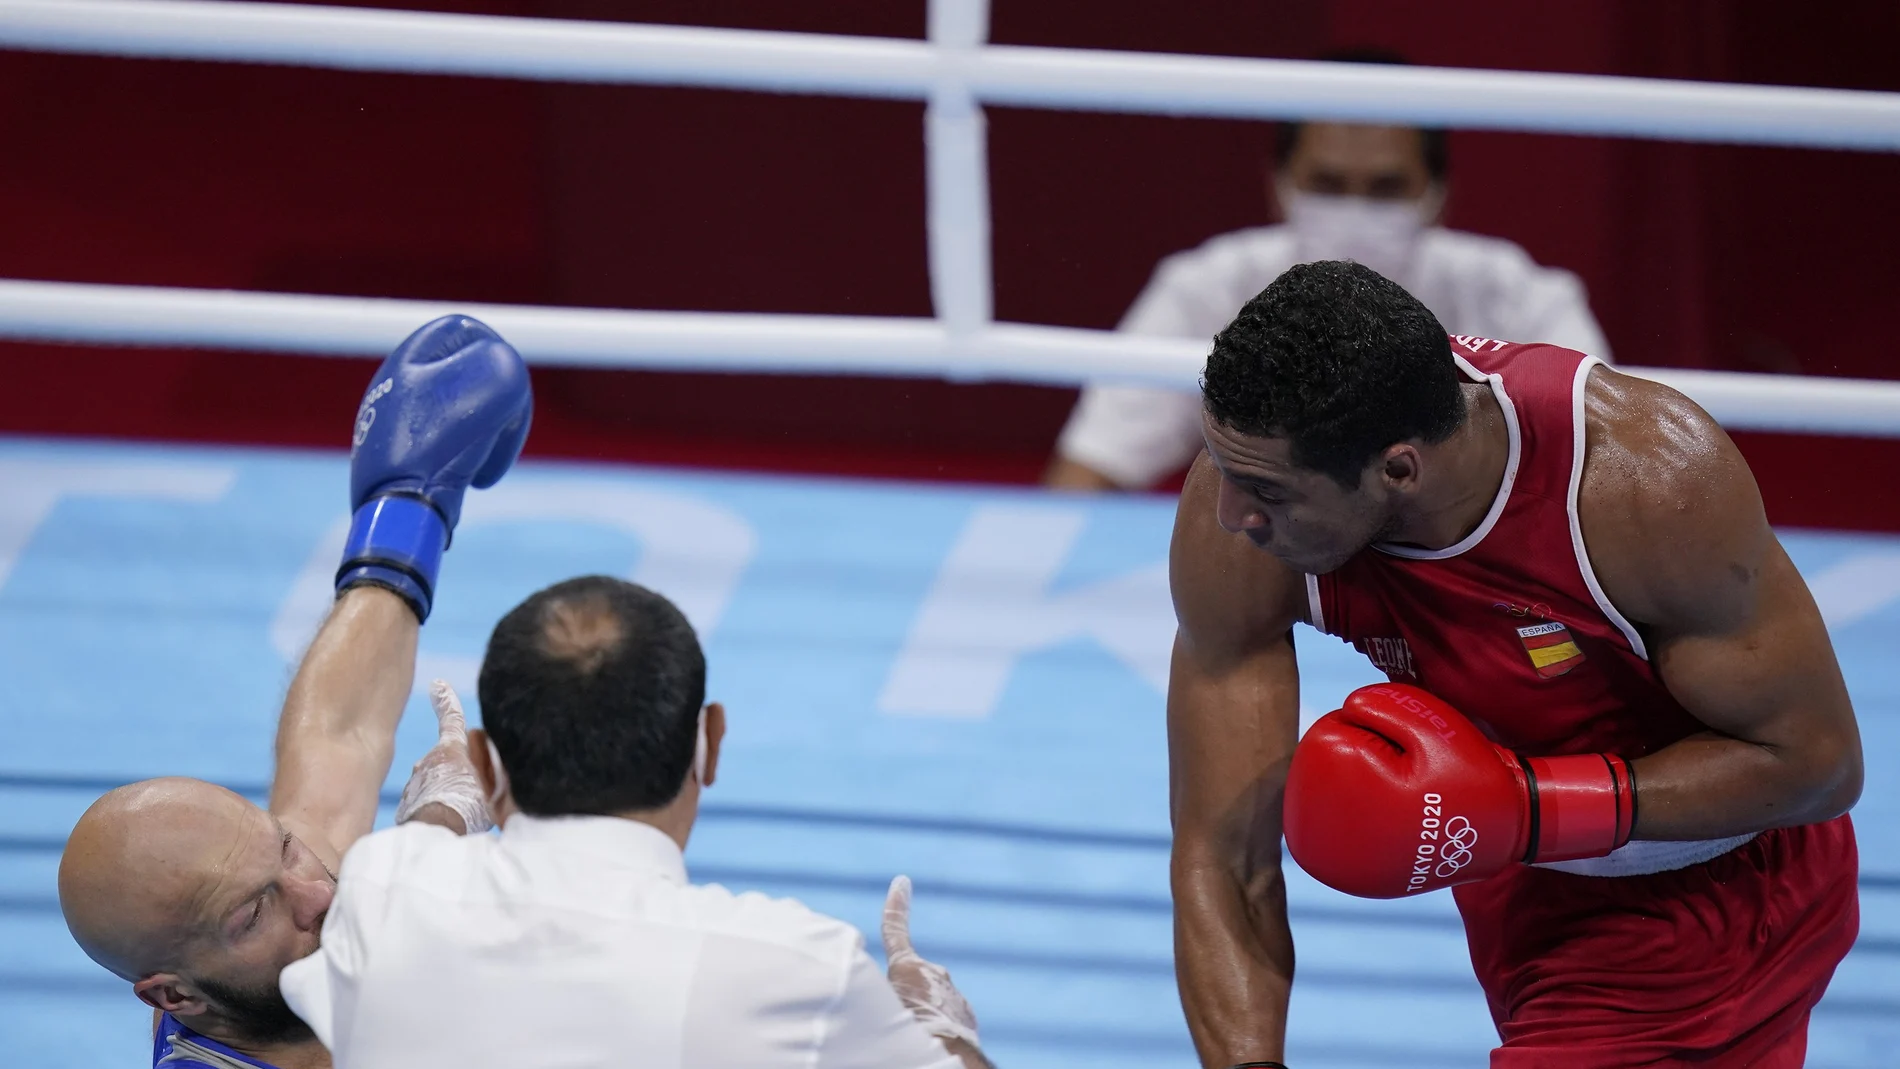 Enmanuel Reyes Pla, right, punches Kazakhstan's Vassiliy Levit during their men's heavyweight 91-kg boxing match at the 2020 Summer Olympics, Tuesday, July 27, 2021, in Tokyo, Japan. (AP Photo/Frank Franklin II)